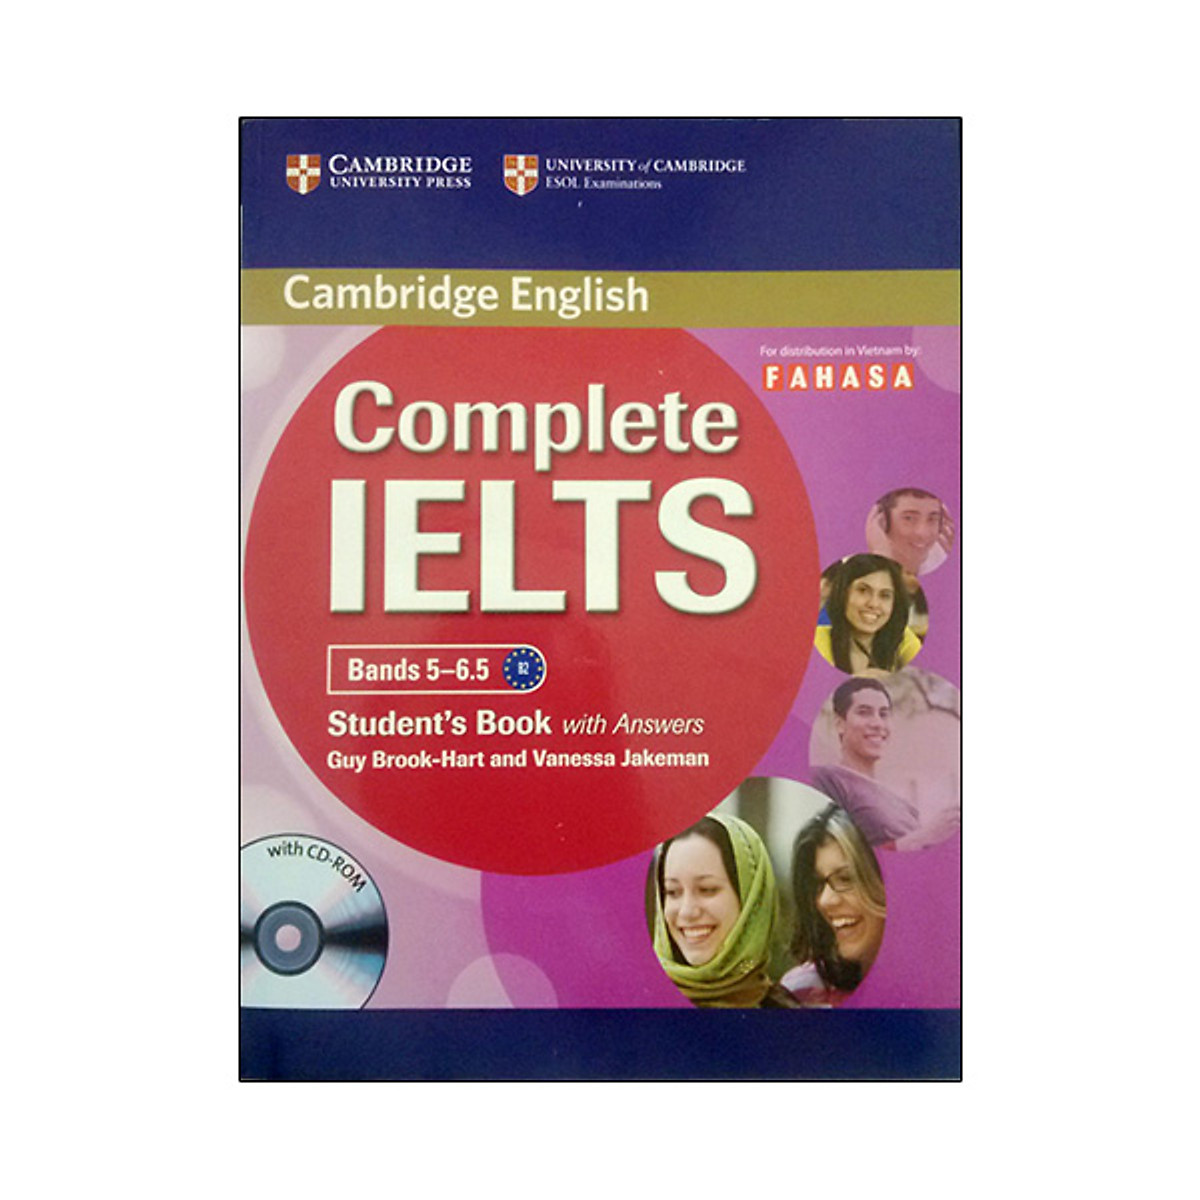 Complete IELTS B2 Student's Book with answer & CD-Rom